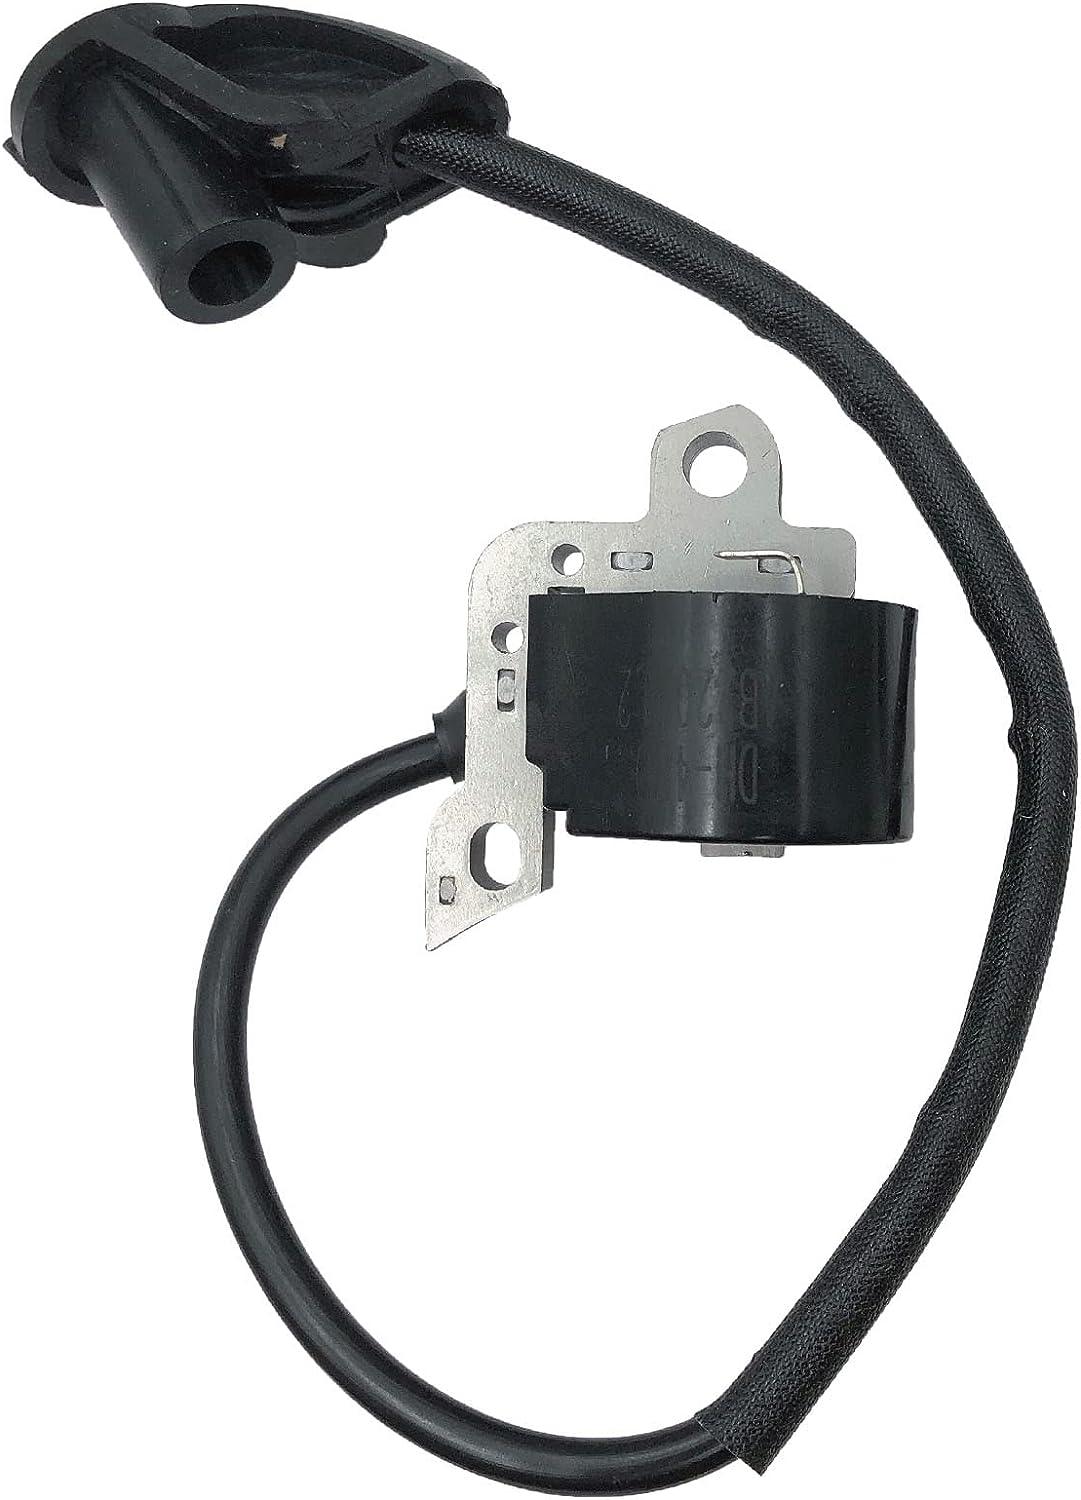 Hipa GA752A Ignition Coil Compatible with Stihl FS400 FS450 FS480 Clearing Saw FR450 FR480 Brushcutters Similar to 41284001306 - hipaparts